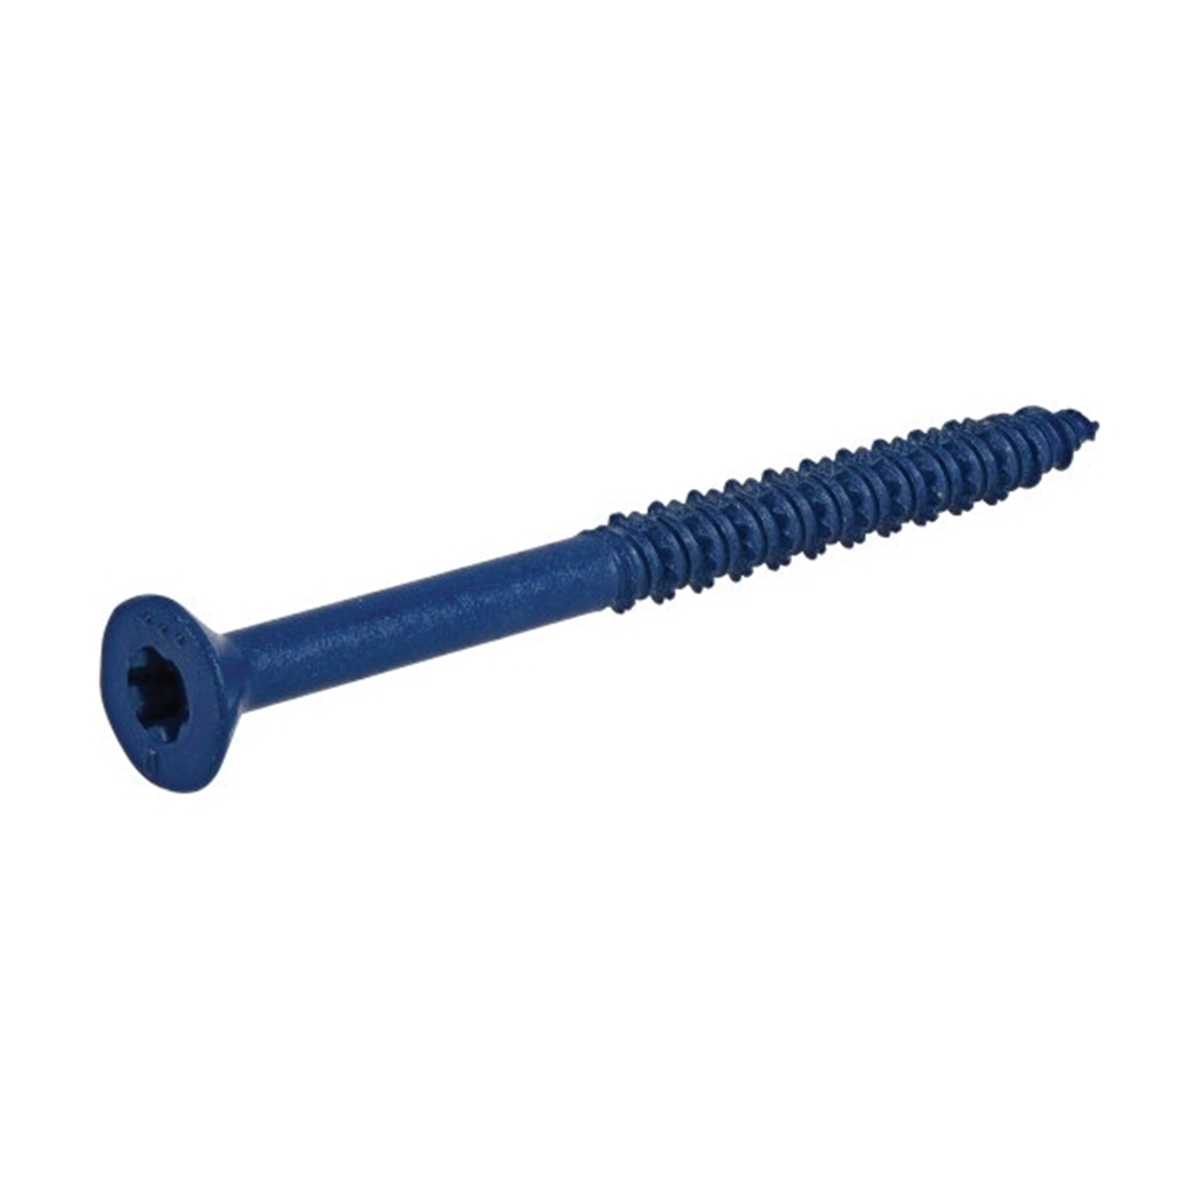 376534 Concrete Screw Anchor, 1/4 in Dia, 3-1/4 in L, Carbon Steel, Epoxy-Coated, 100/PK